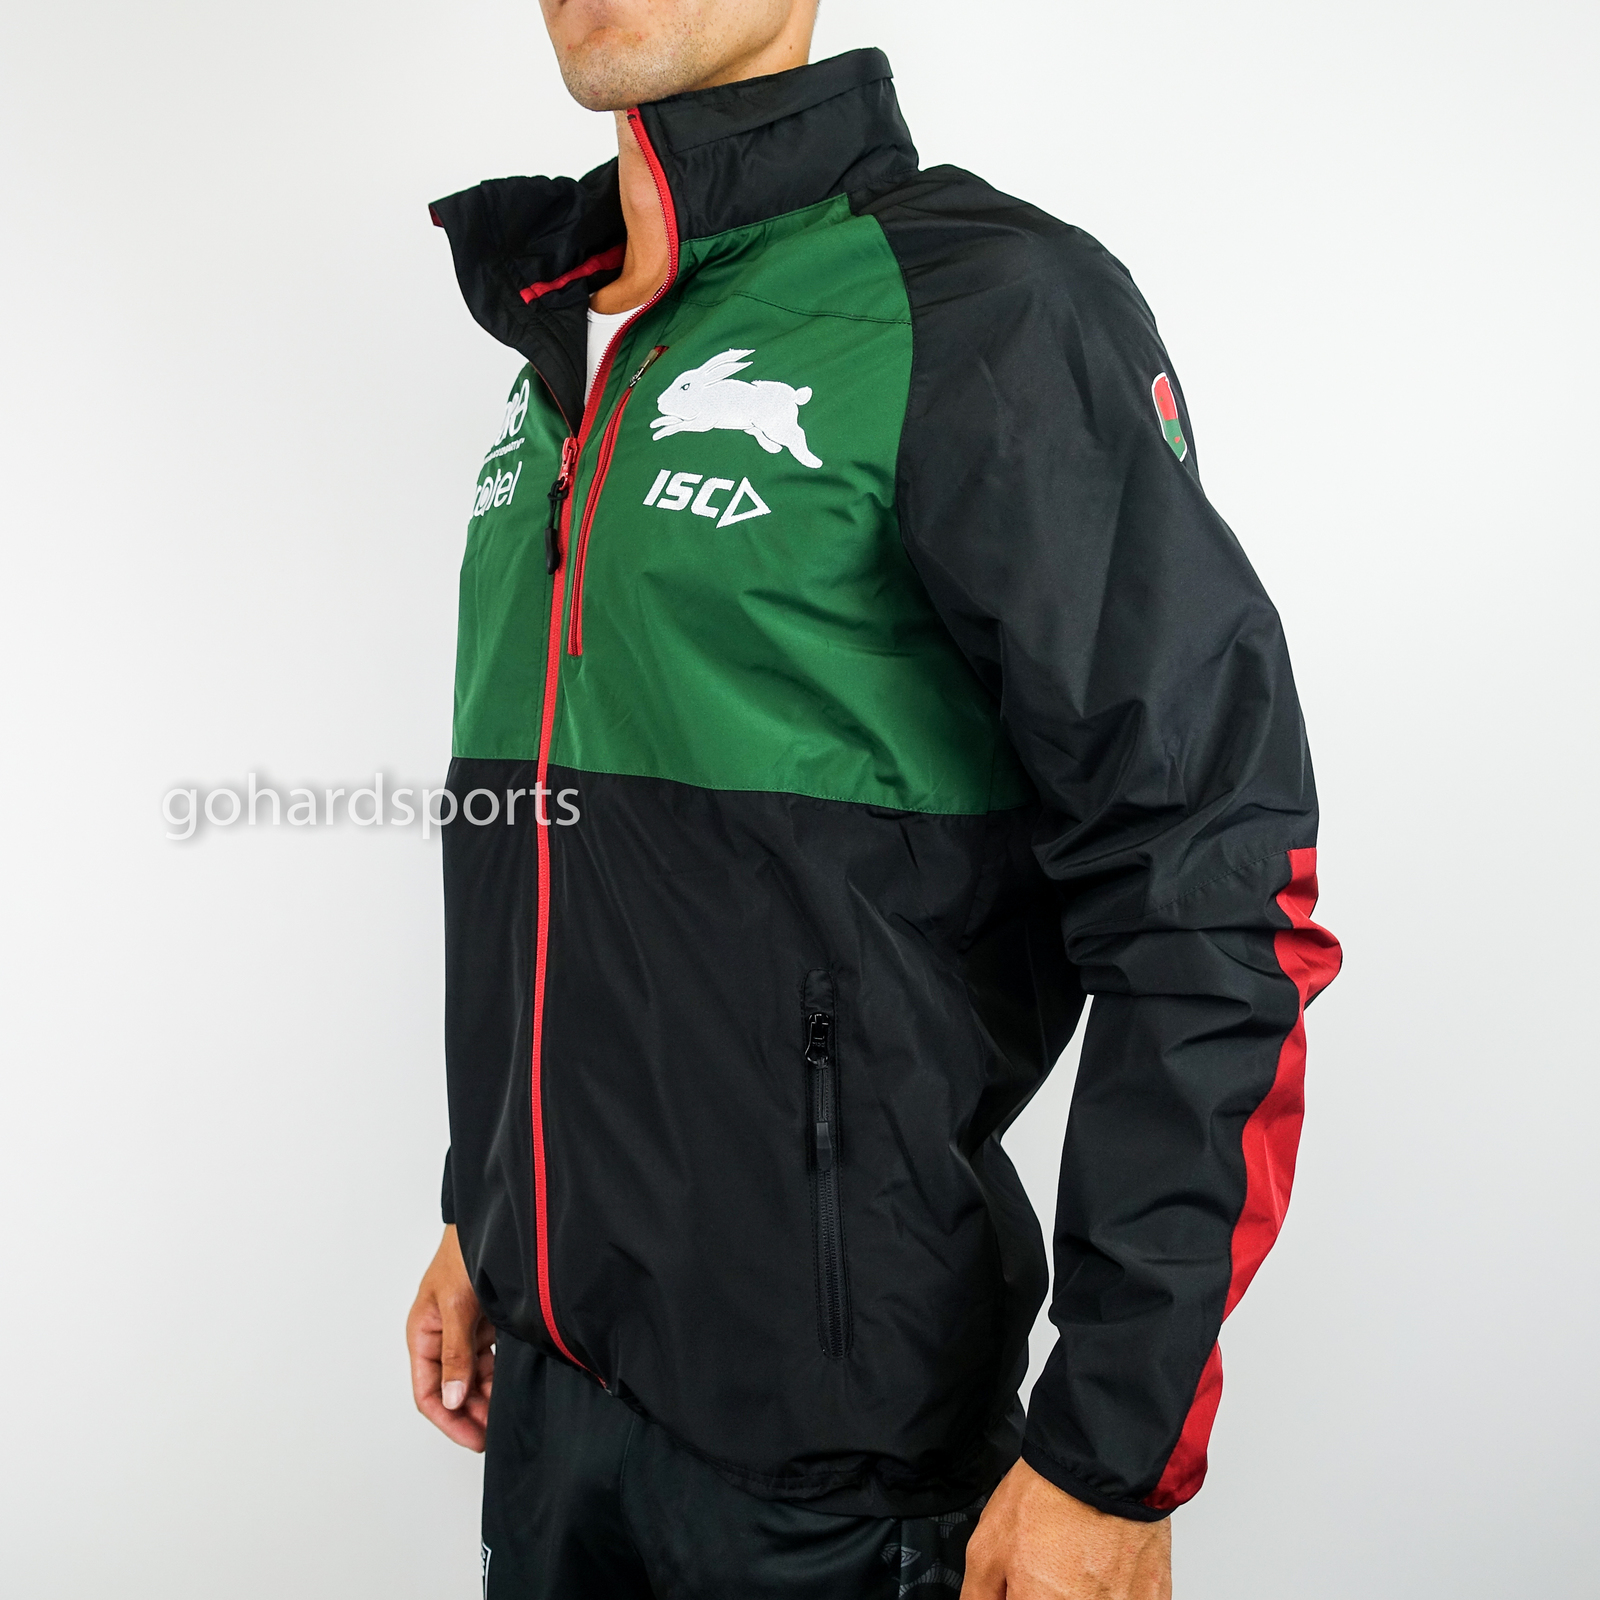 Details about   South Sydney Rabbitohs 2021 NRL Wet Weather Jacket Sizes S-5XL BNWT 